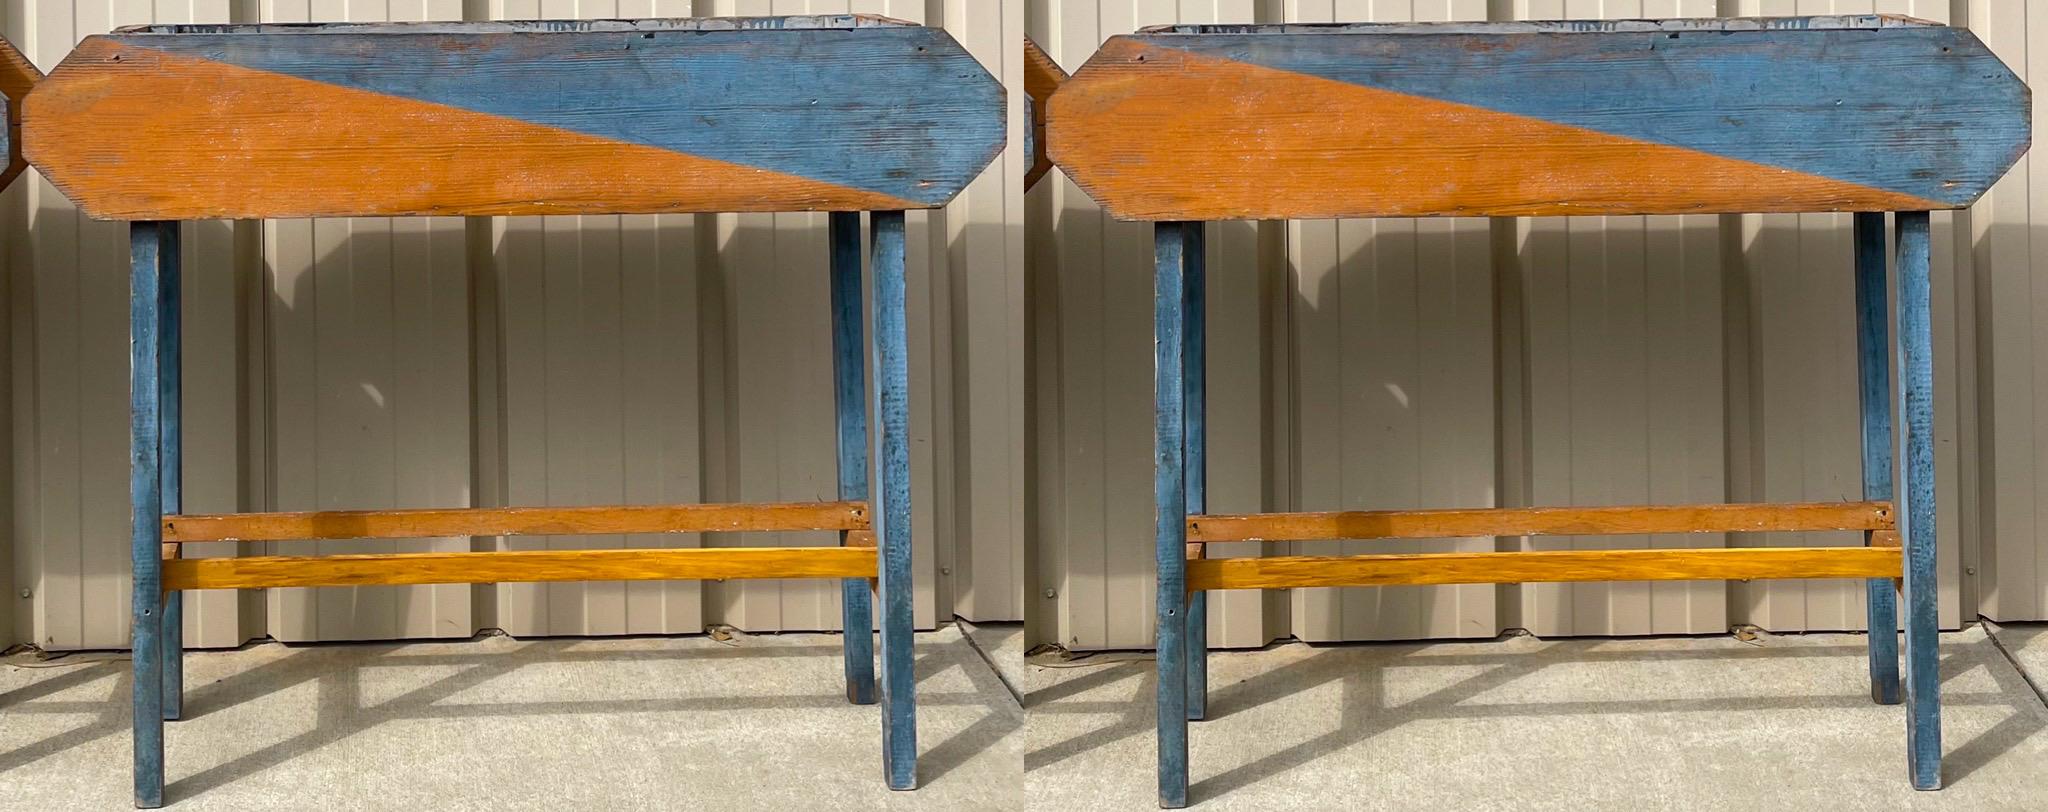 Mid-Century Primitive Organic Folk Art Painted Blue Planters or Window Boxes, 2 In Good Condition For Sale In Kennesaw, GA